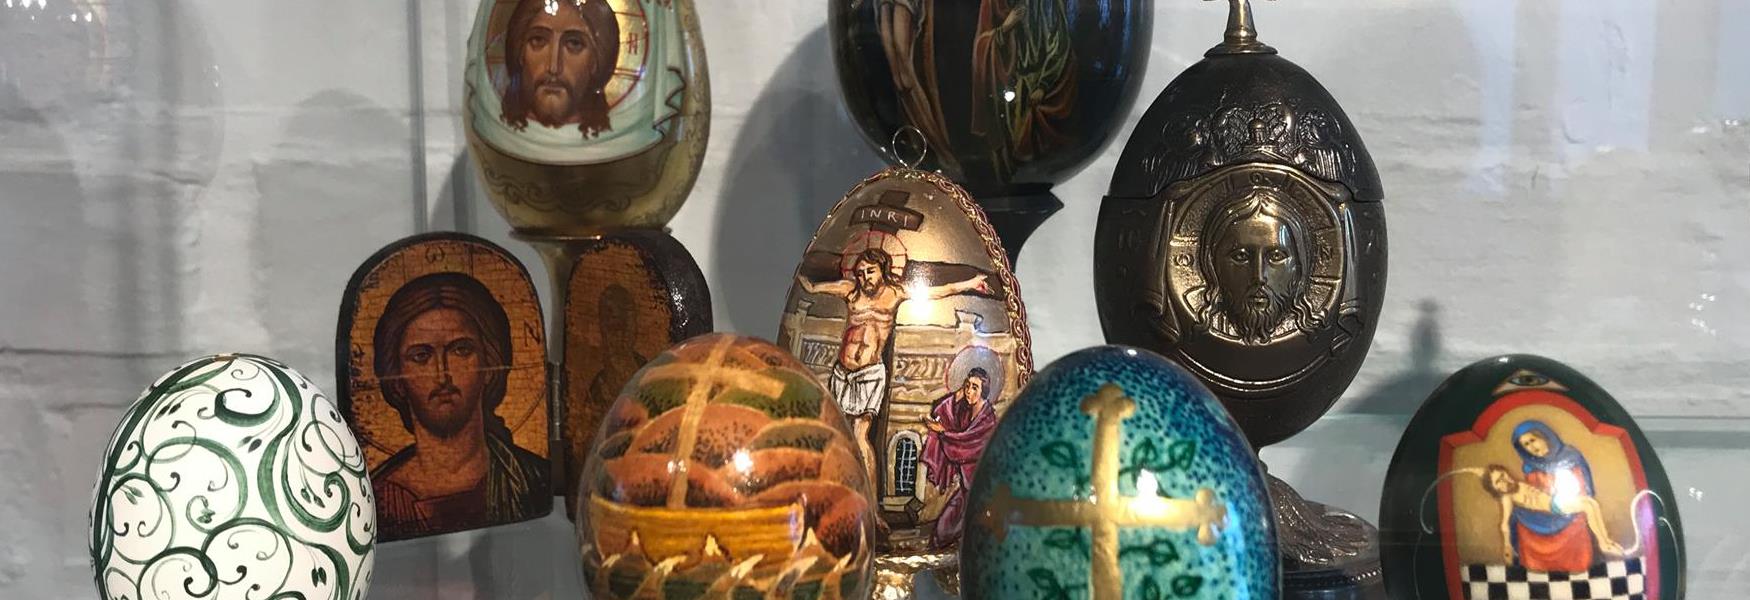 collection of painted eggs with pictures